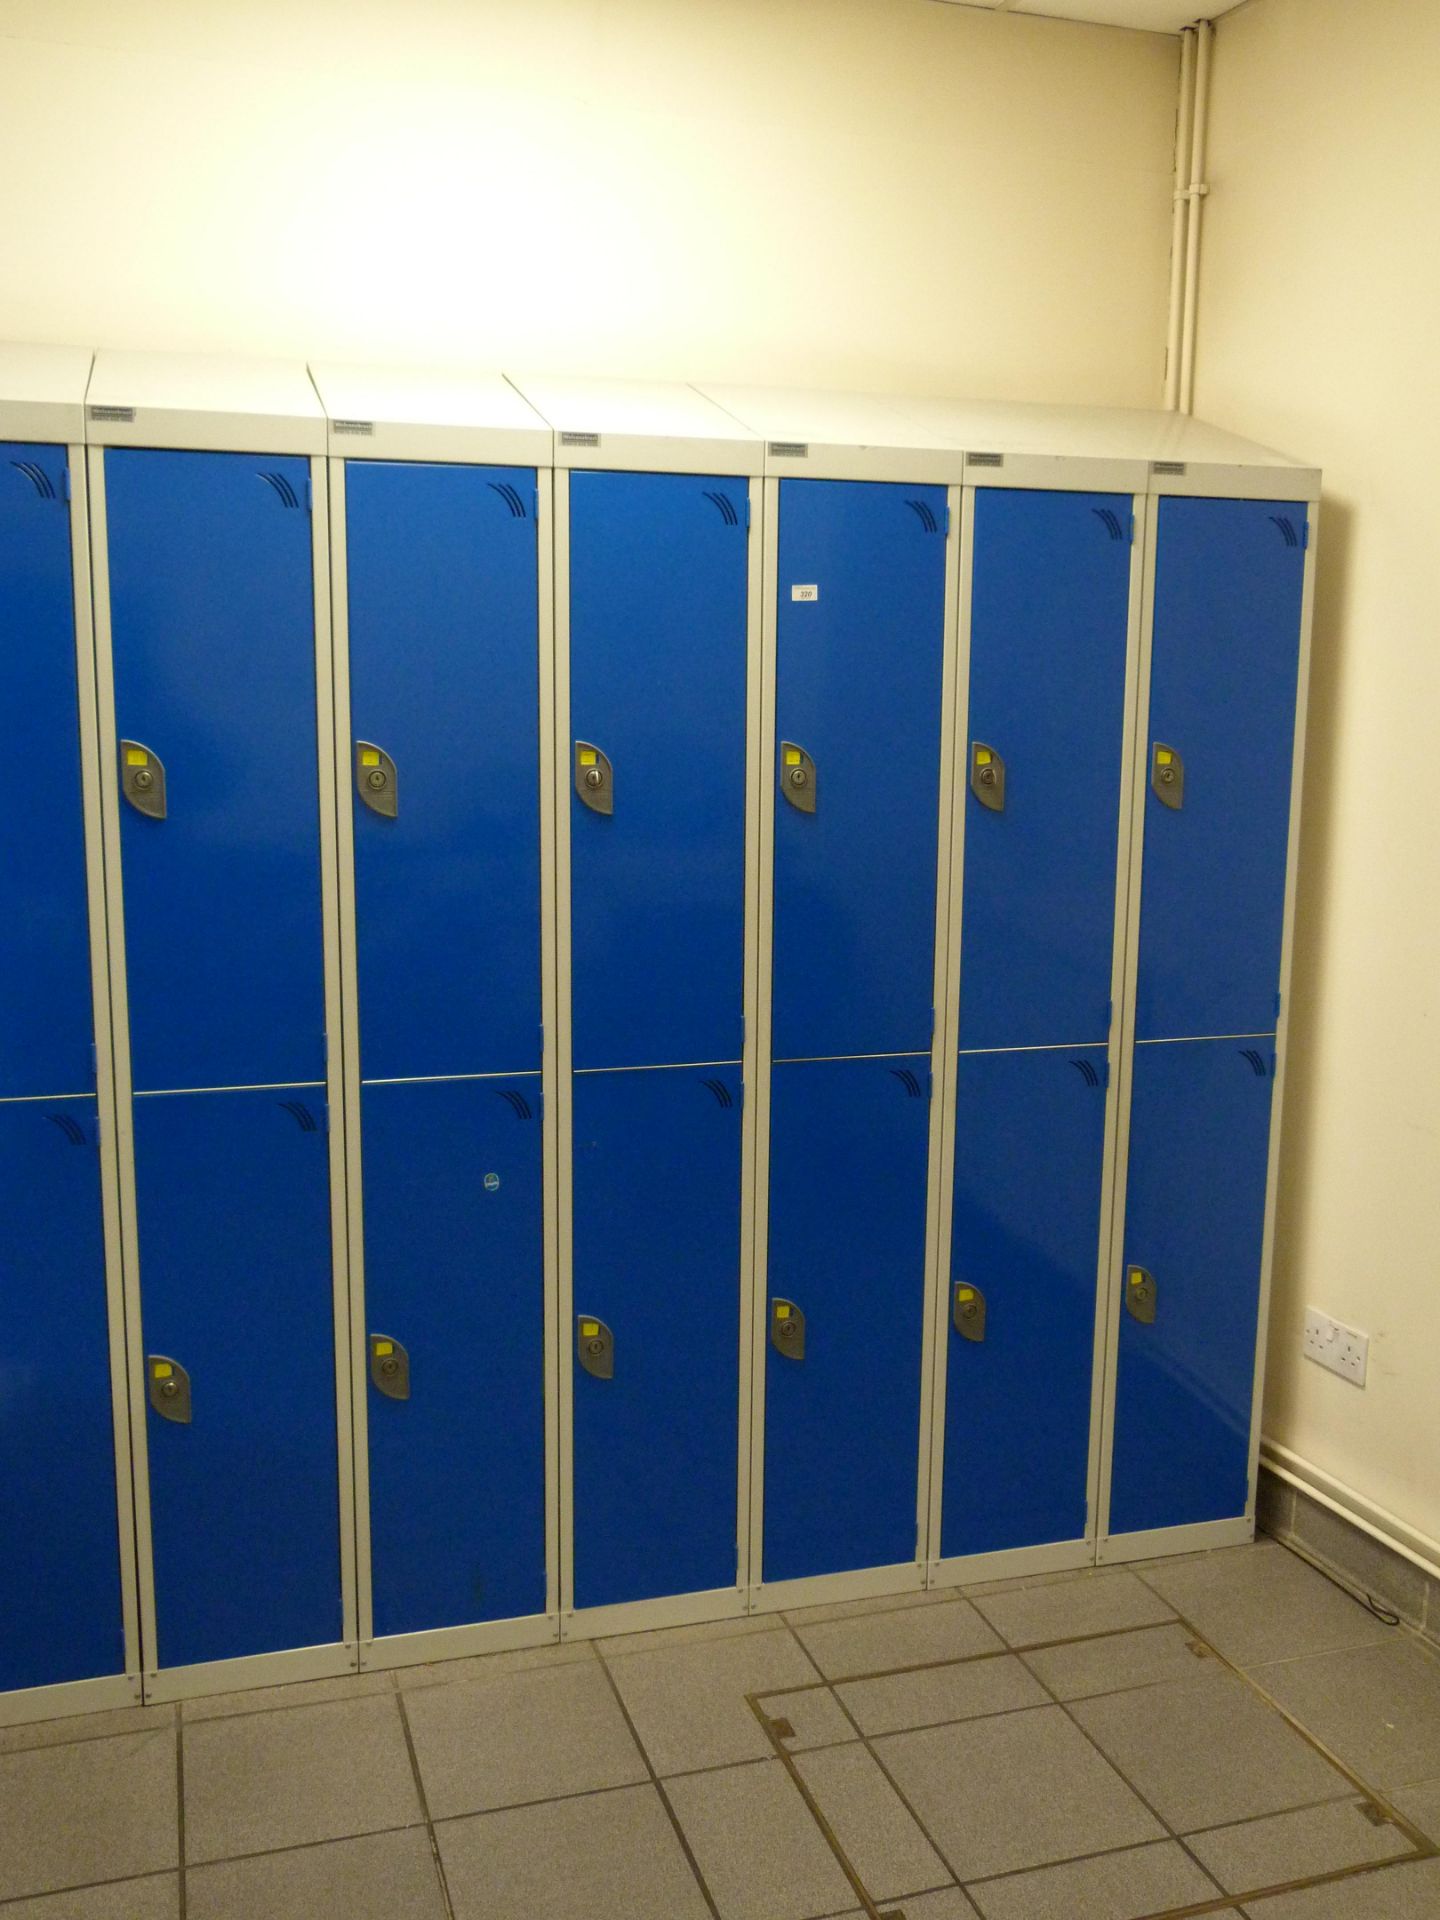 6 x 2 compartment personal lockers,